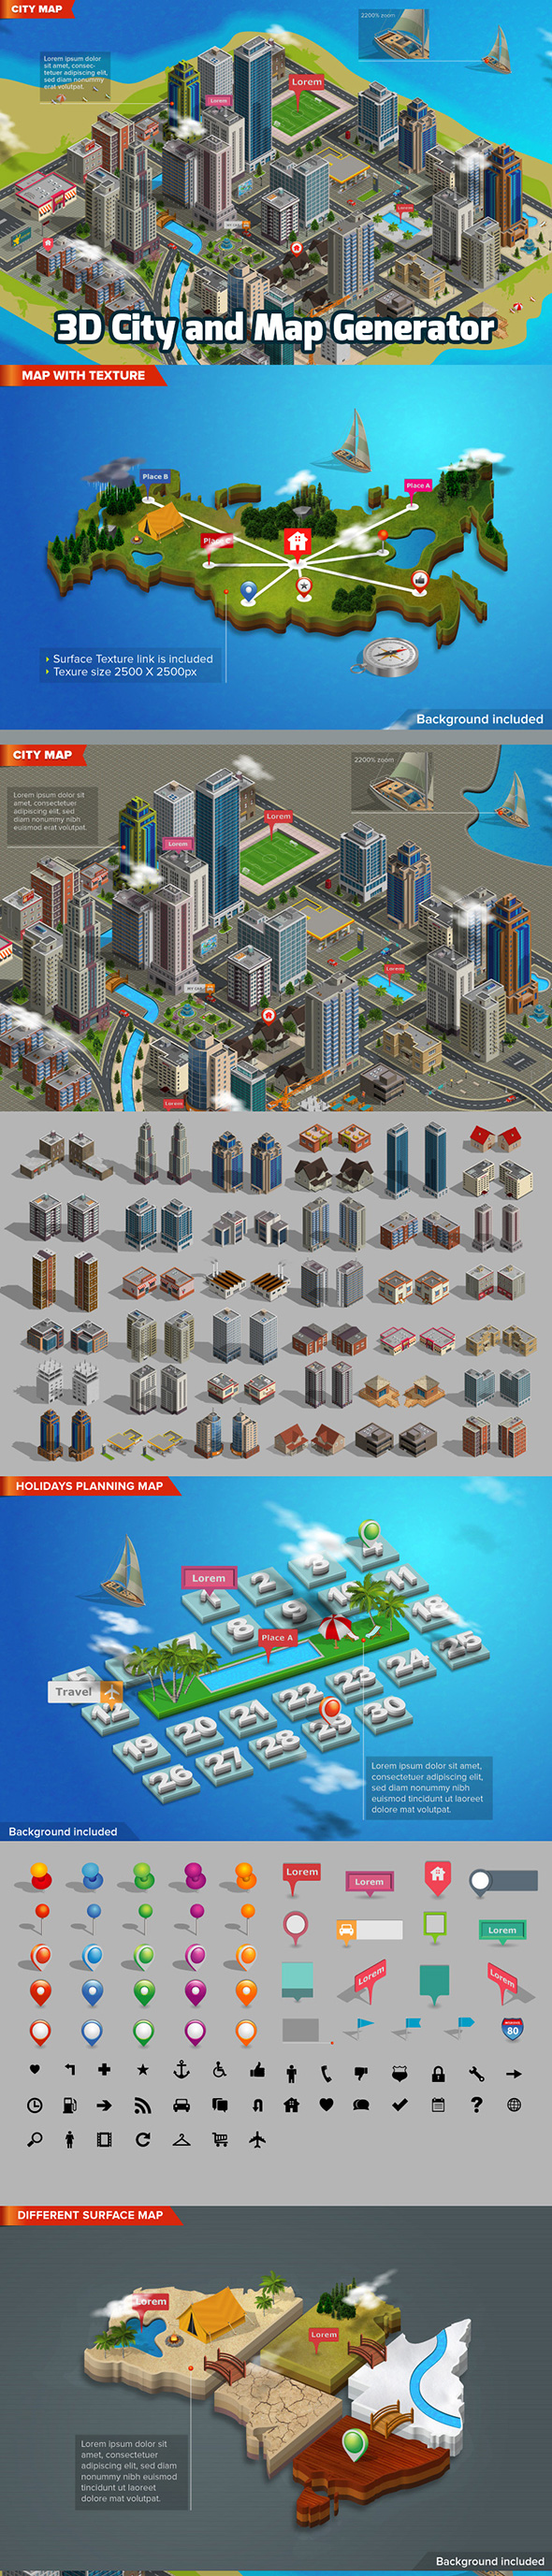 3D City and Map Generator by designhatti | GraphicRiver